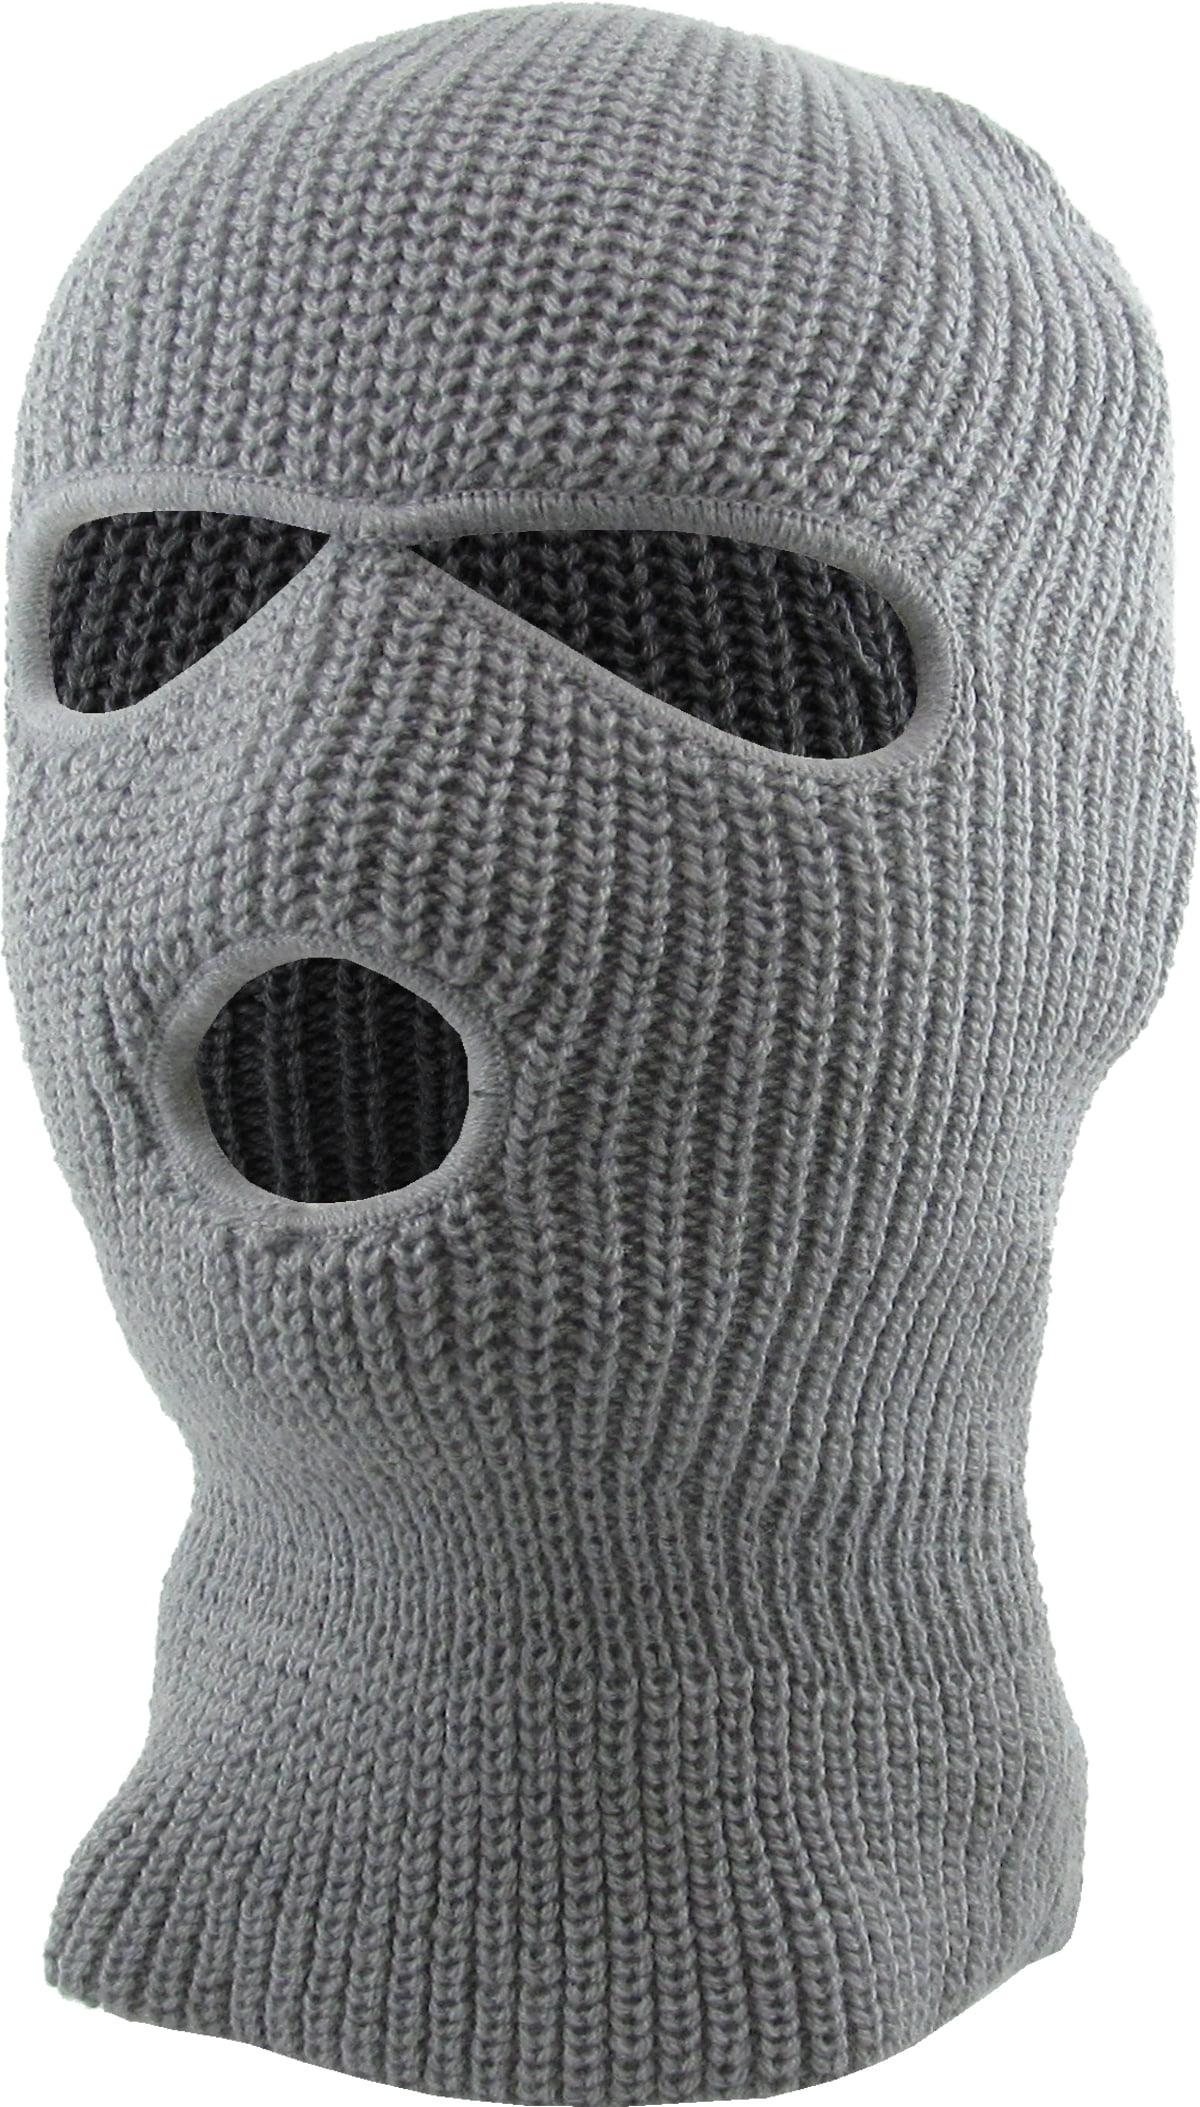 Three Hole Mask Full Face Cover Ski Hat Winter Knitted Beanie - Walmart.com